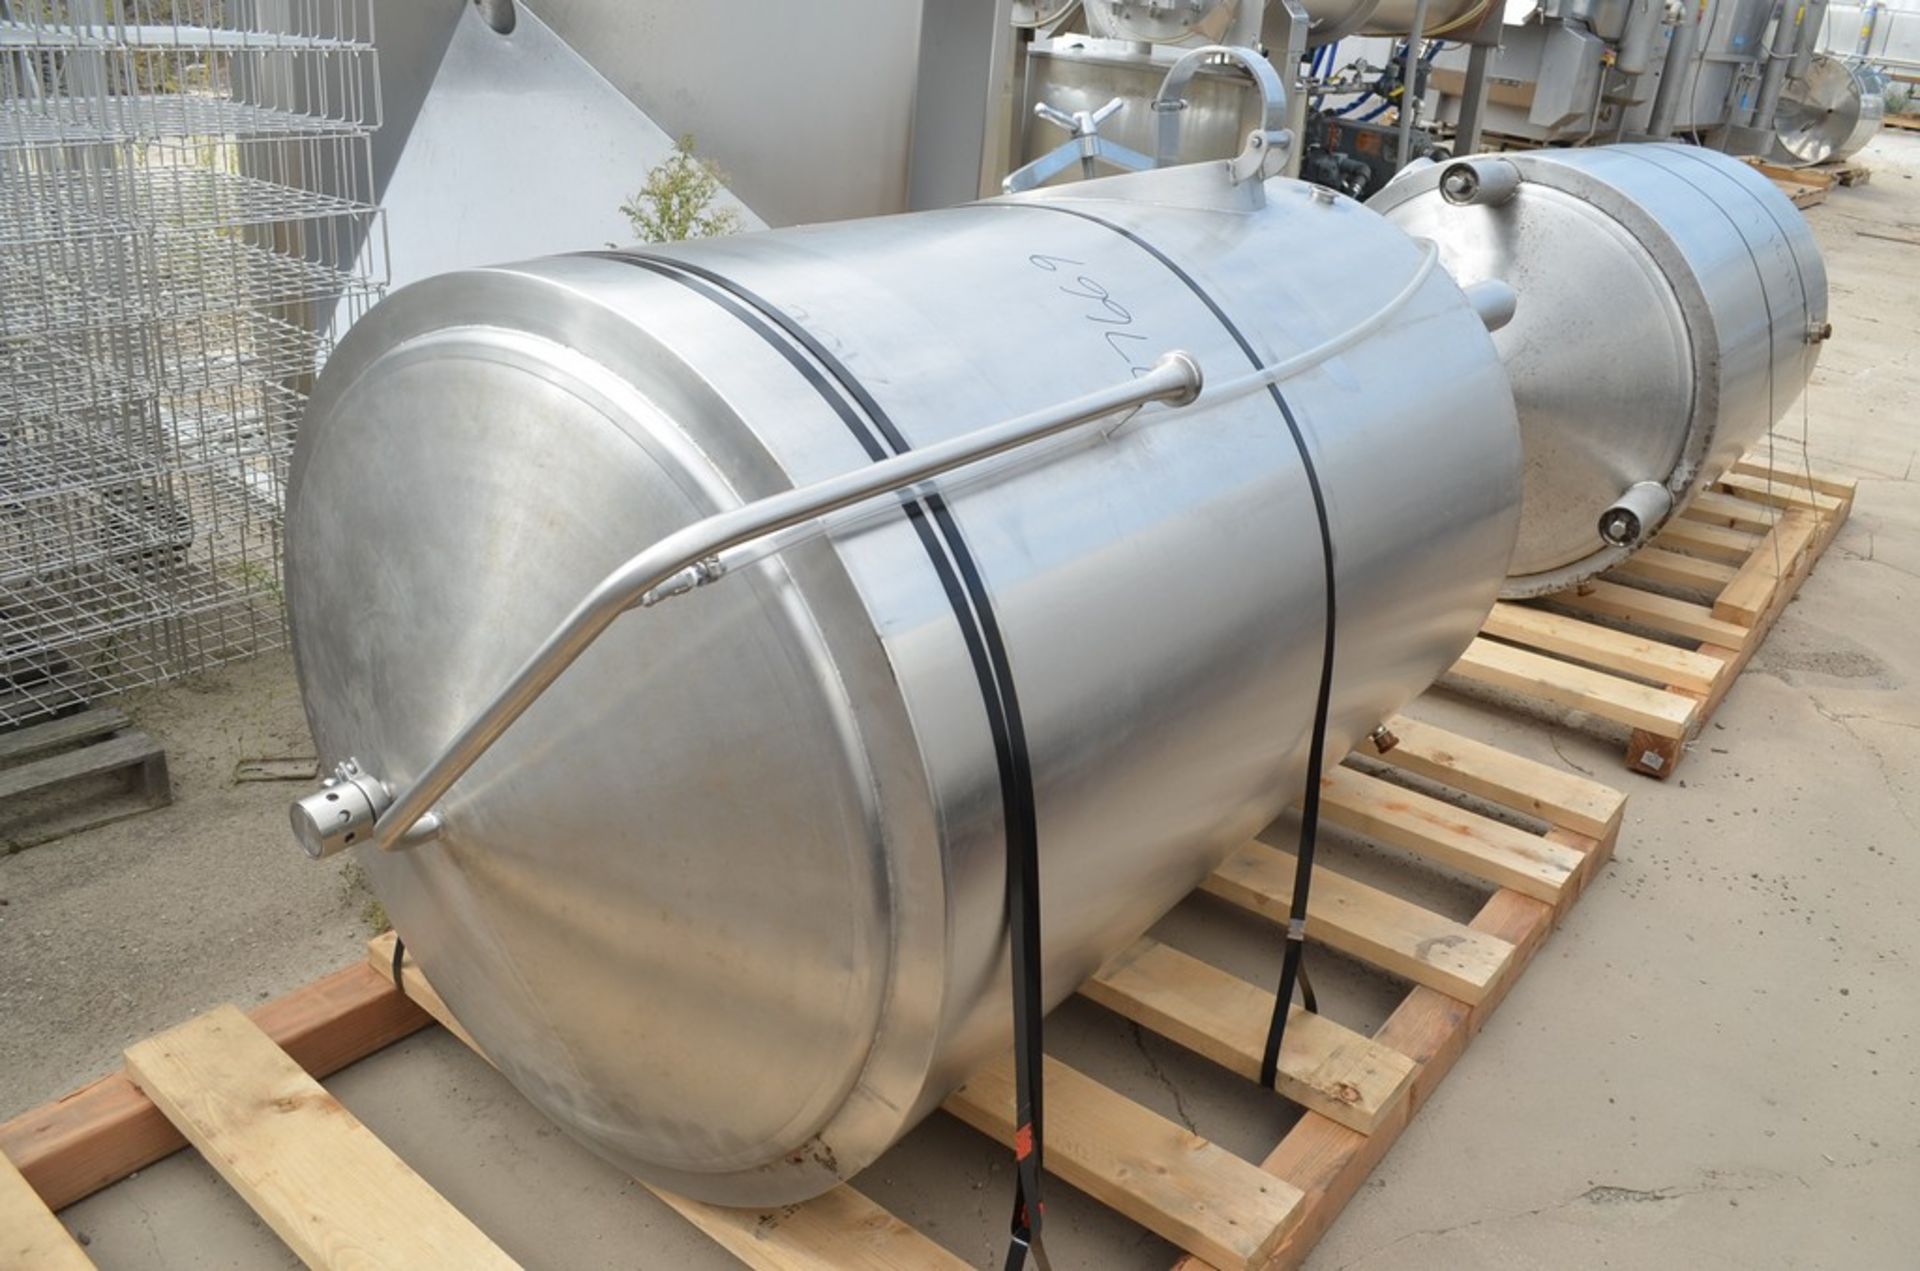 8.5 BBL (1,000 Liter/265 Gallons) Cote Manufacturing Vertical S/S Jacketed Brite Tank. Dome Top, - Image 2 of 11